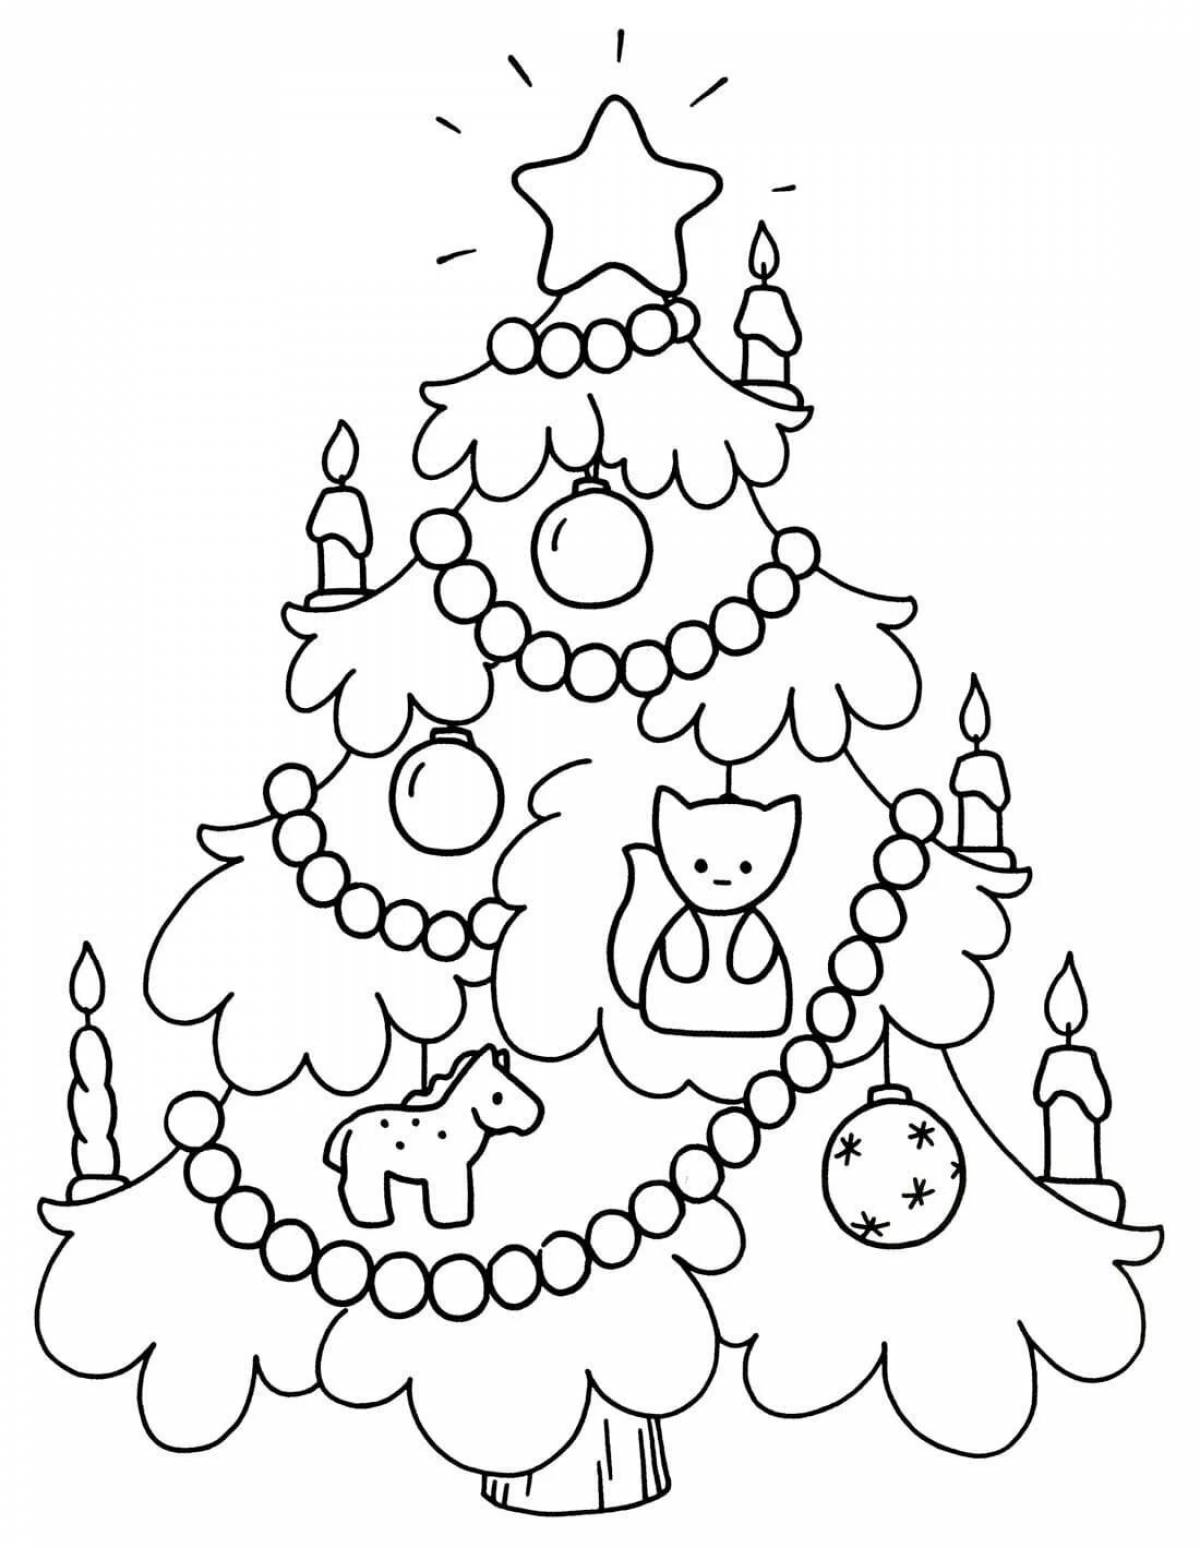 Coloring book joyful Christmas tree for children 5-6 years old